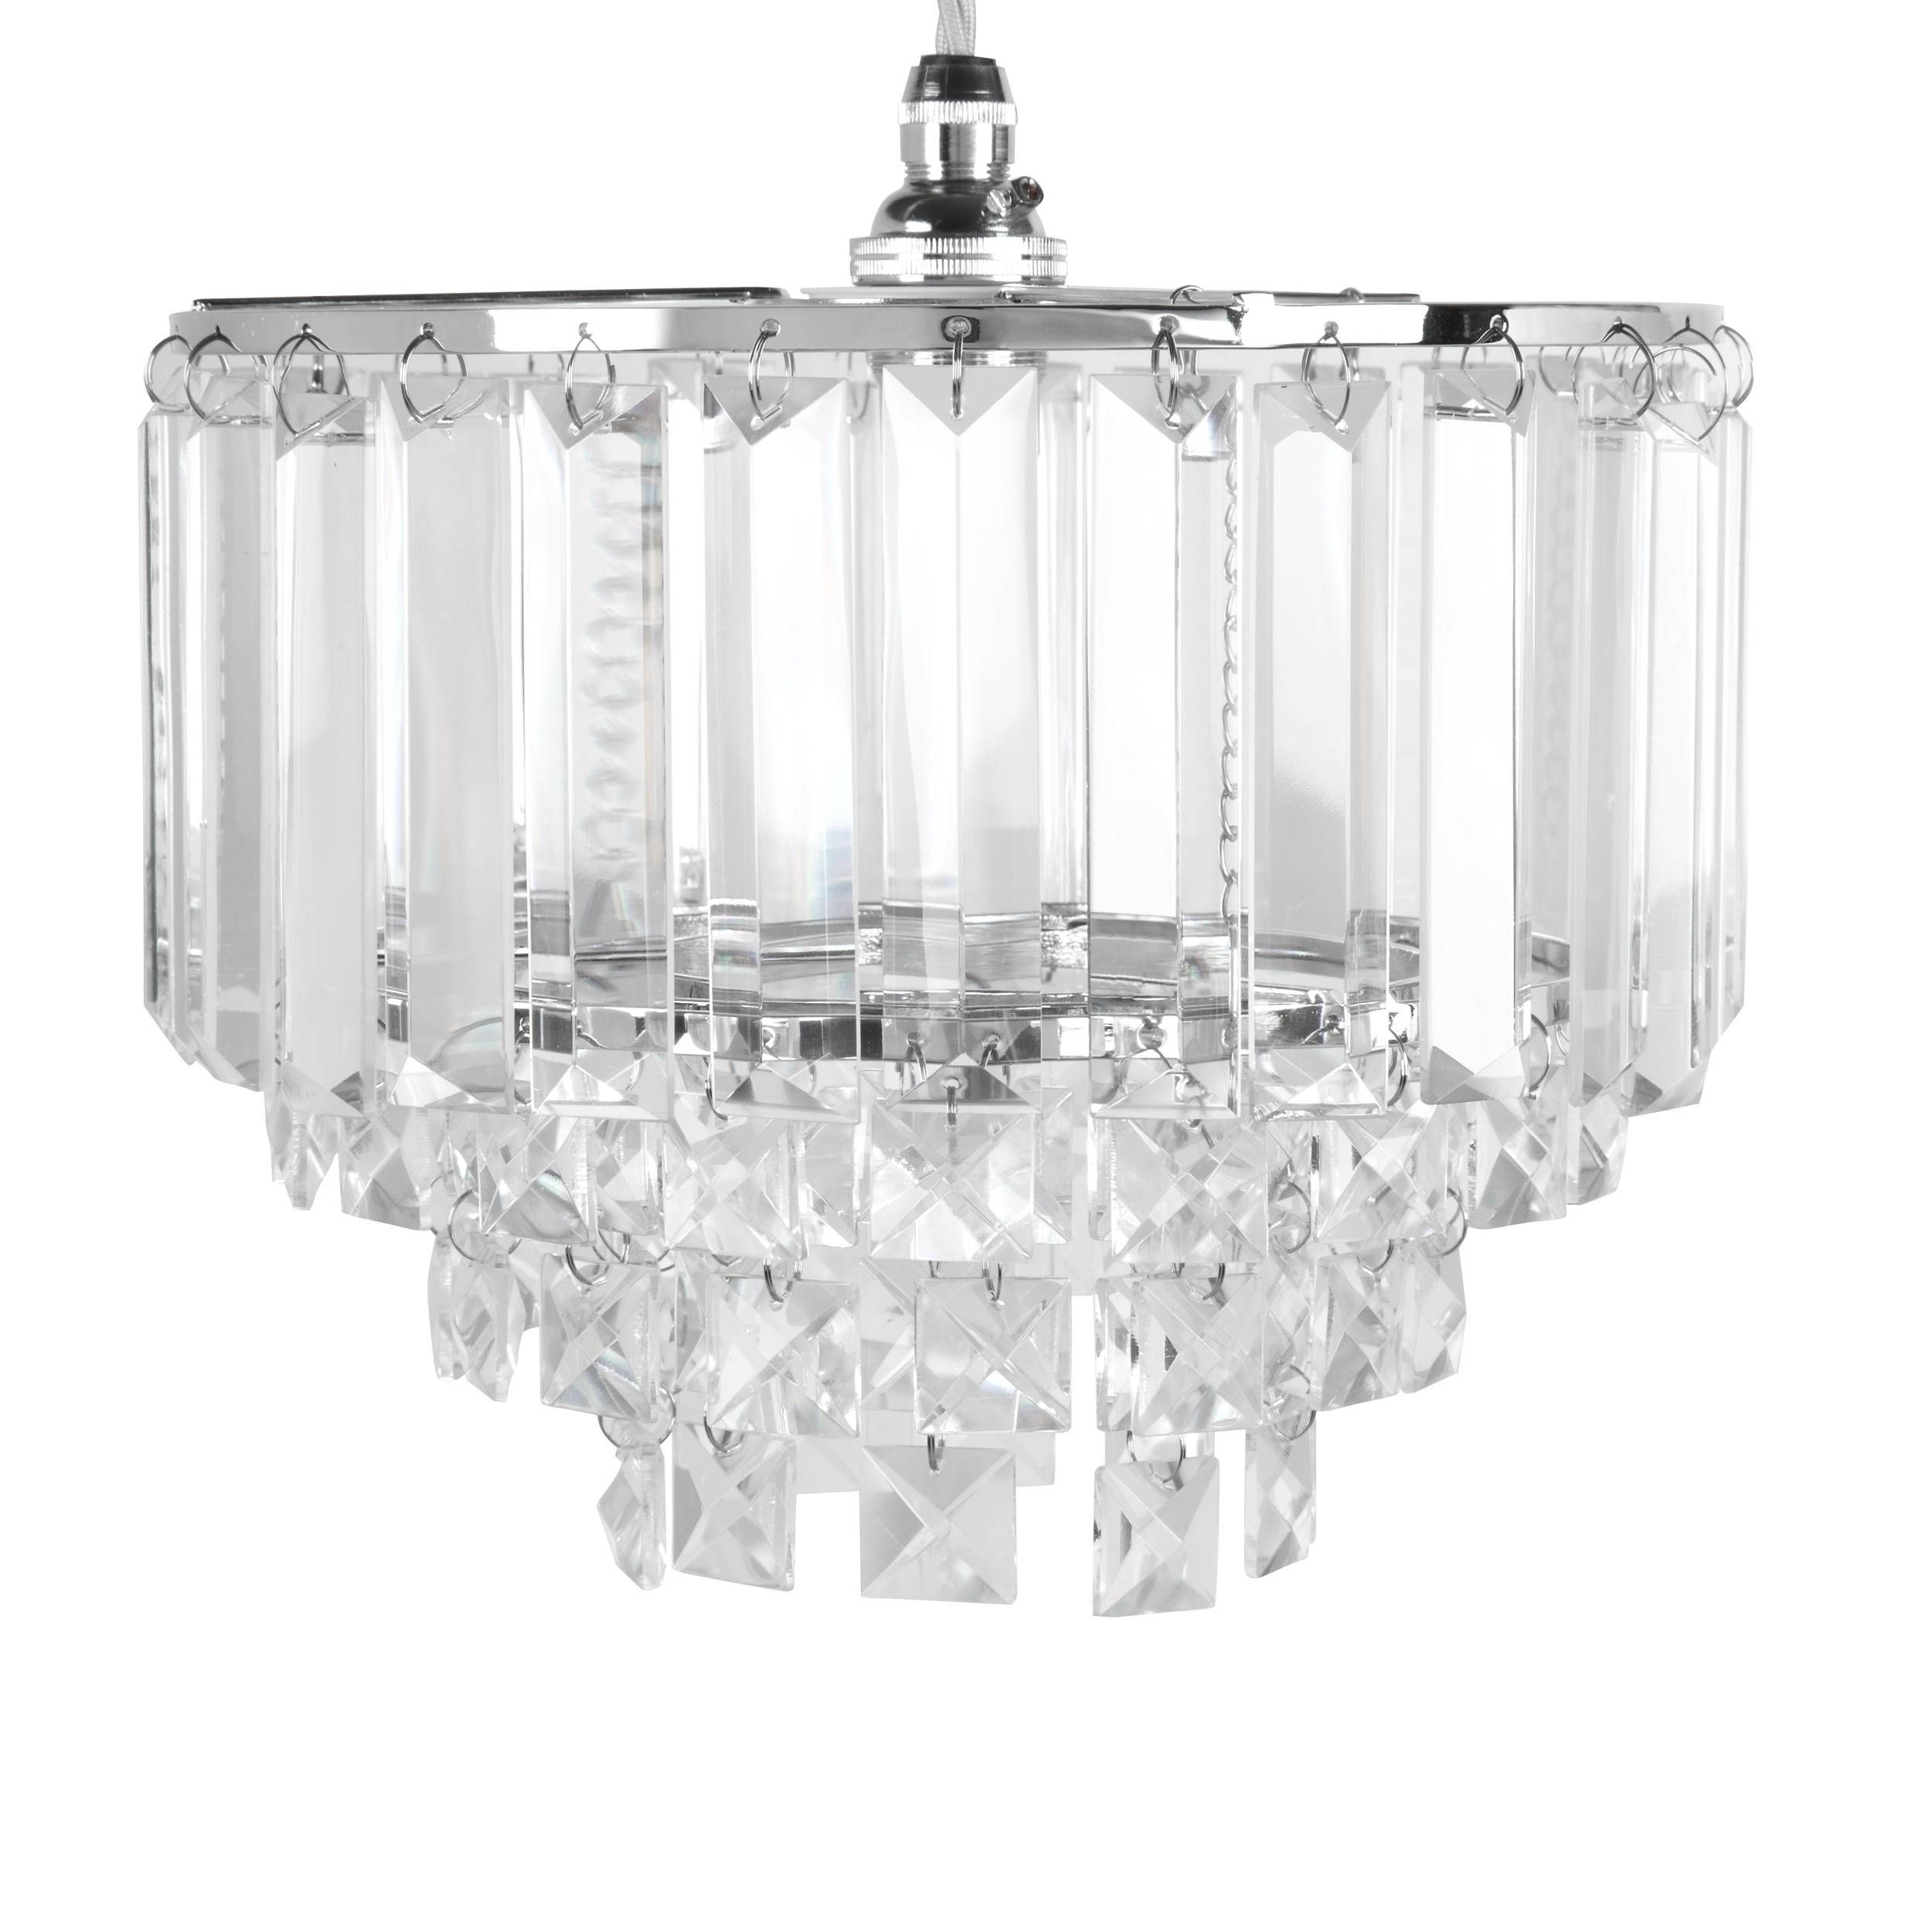 Vienna Easy Fit Pendant Light At Laura Ashley Intended For Easy Fit Pendant Lights (Photo 2 of 15)